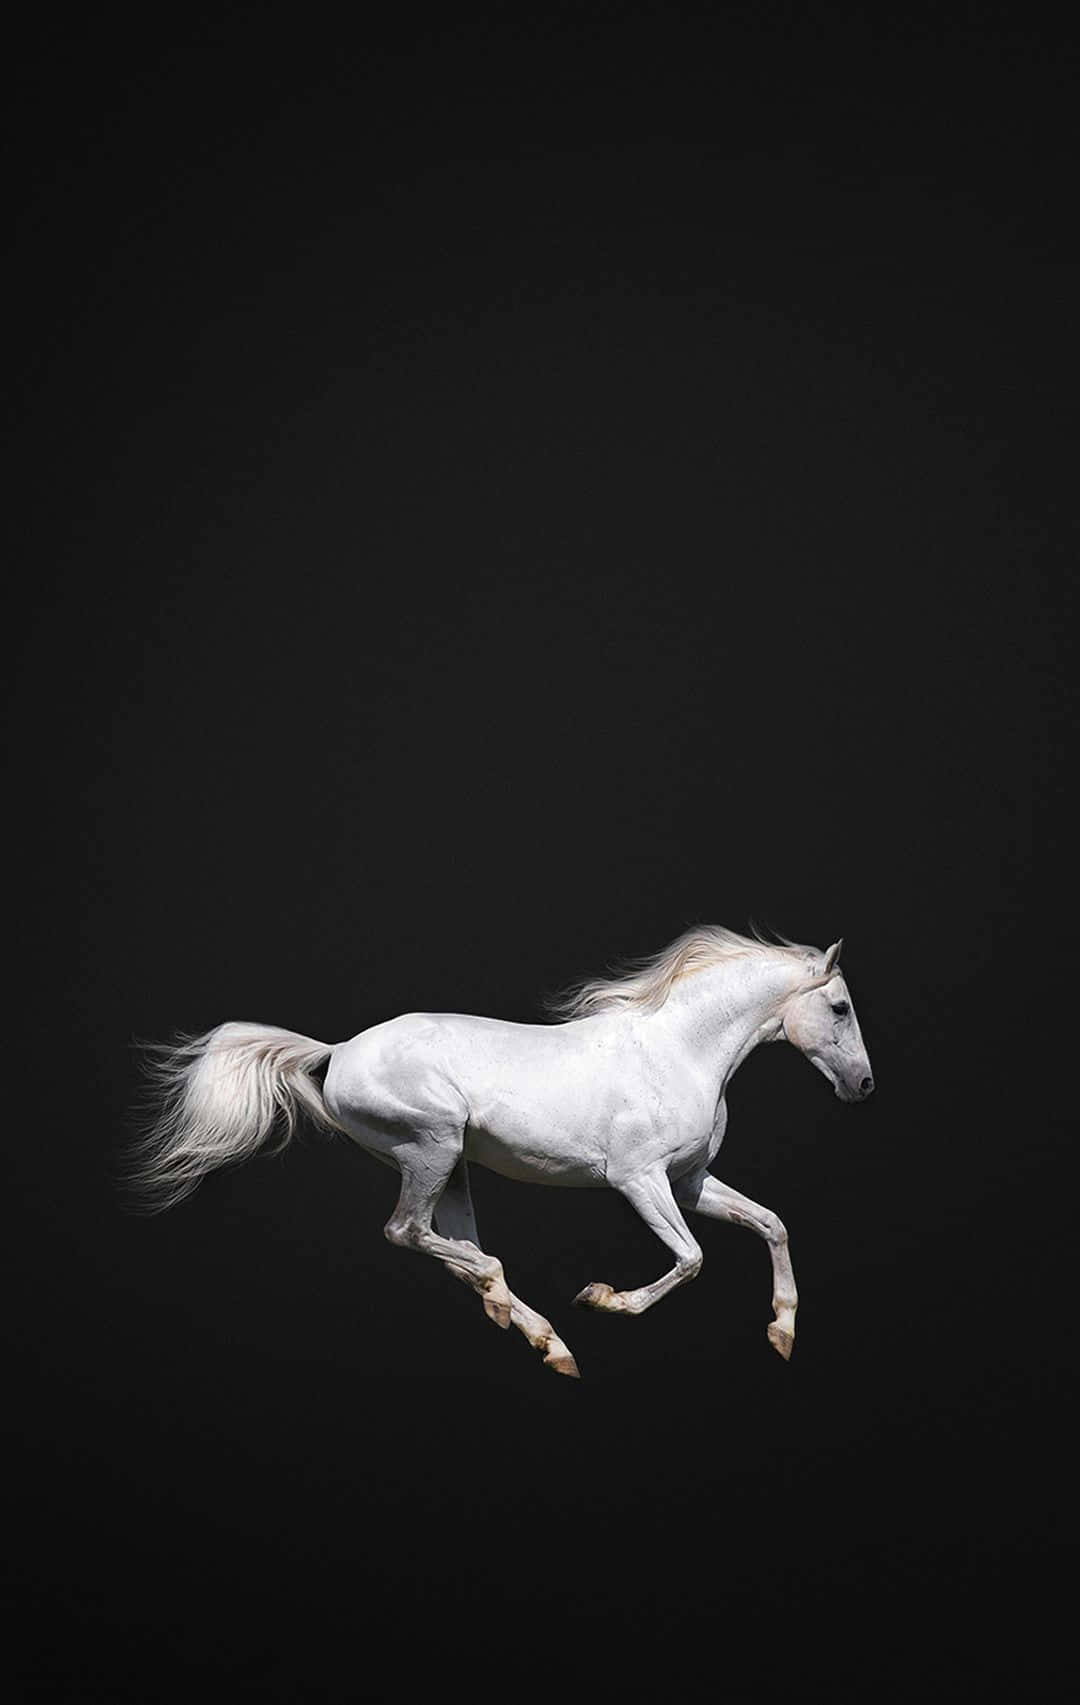 Iphone Wallpaper Horse Images  Free Photos PNG Stickers Wallpapers   Backgrounds  rawpixel